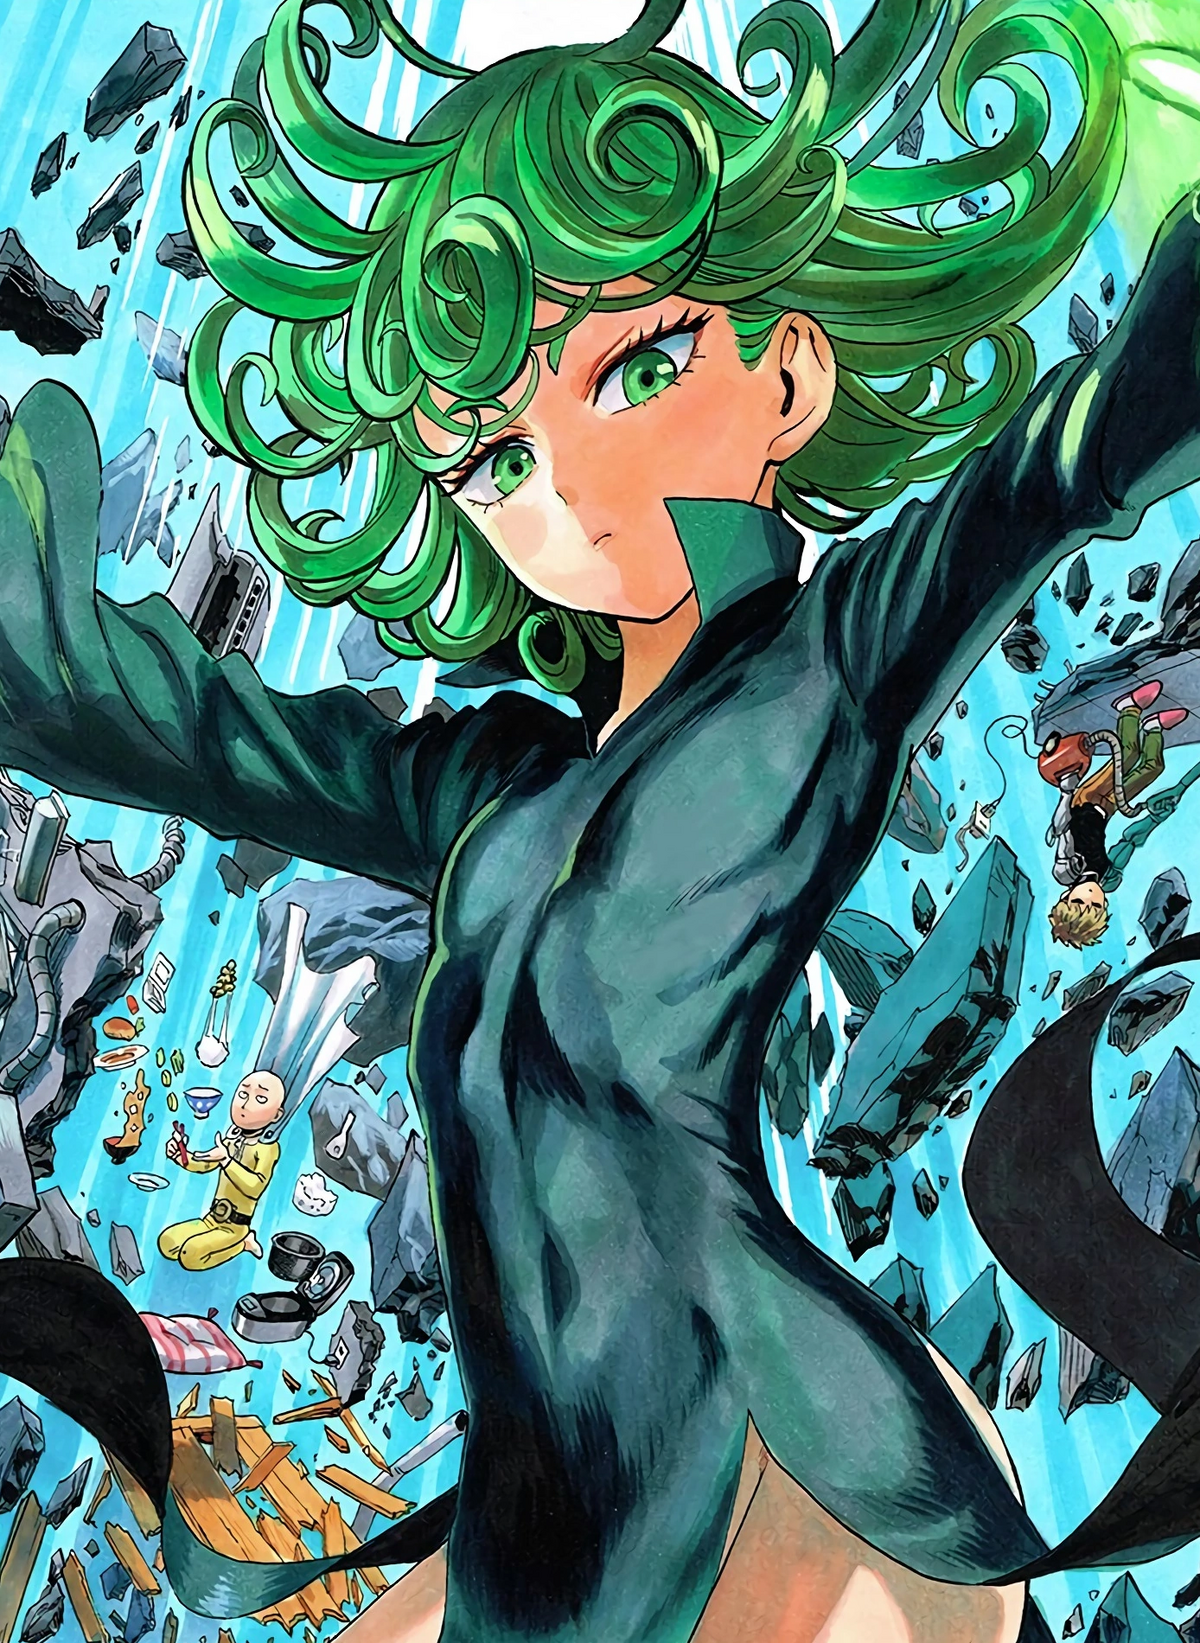 20 female One Punch Man characters, ranked by popularity 